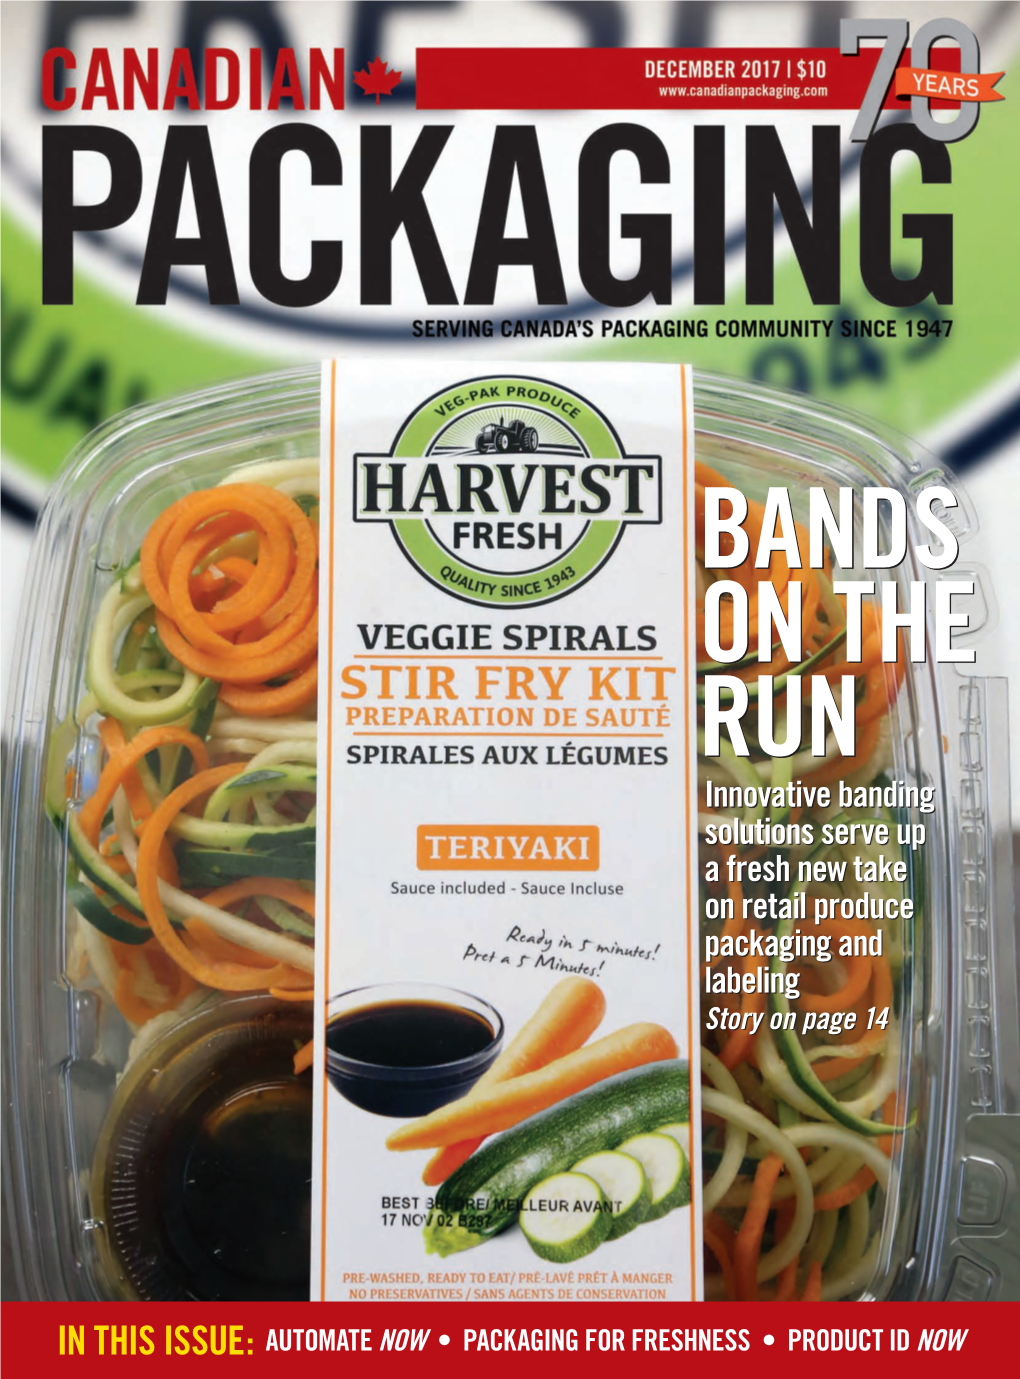 Innovative Banding Solutions Serve up a Fresh New Take on Retail Produce Packaging and Labeling